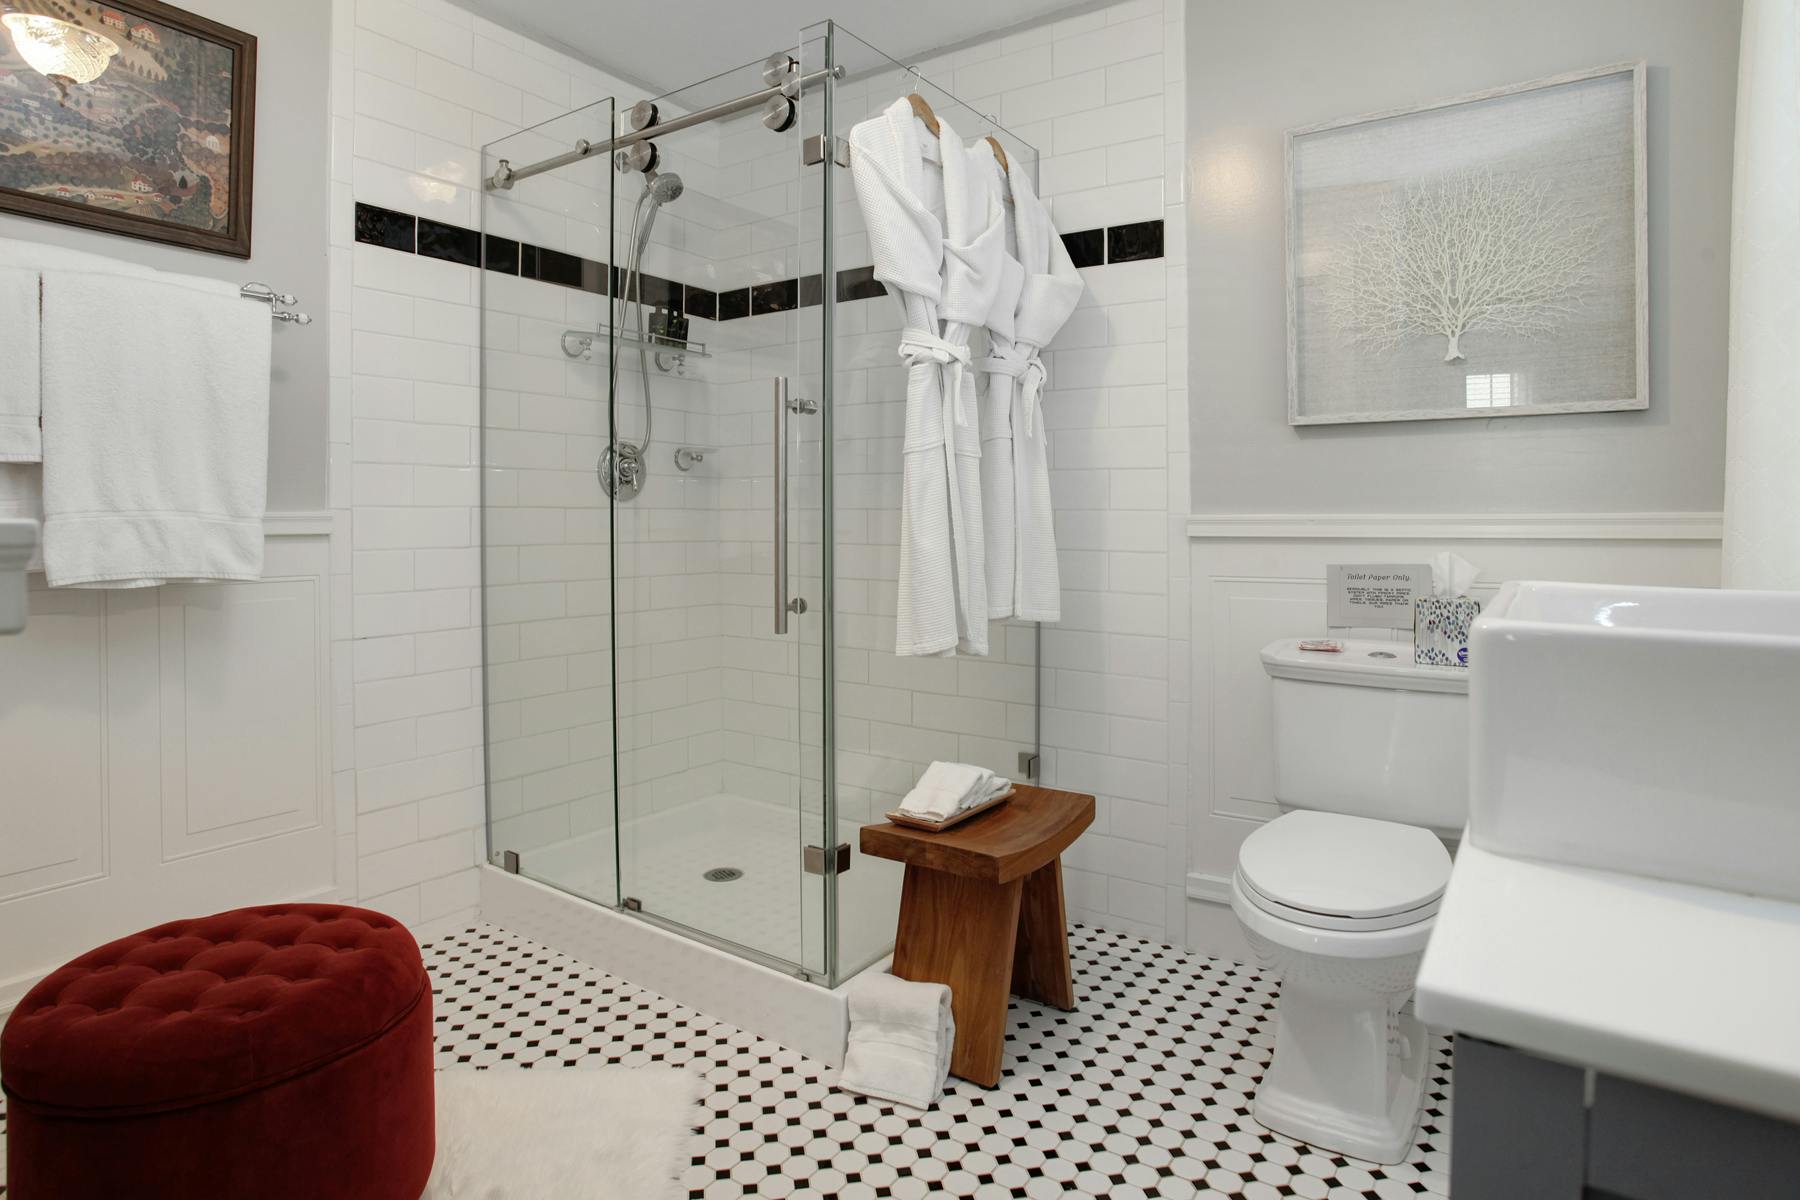 Bathroom with glass enclosed shower, toilet, and vanity, plush white towels and robes, black & white tiled floor and red upholstered ottoman